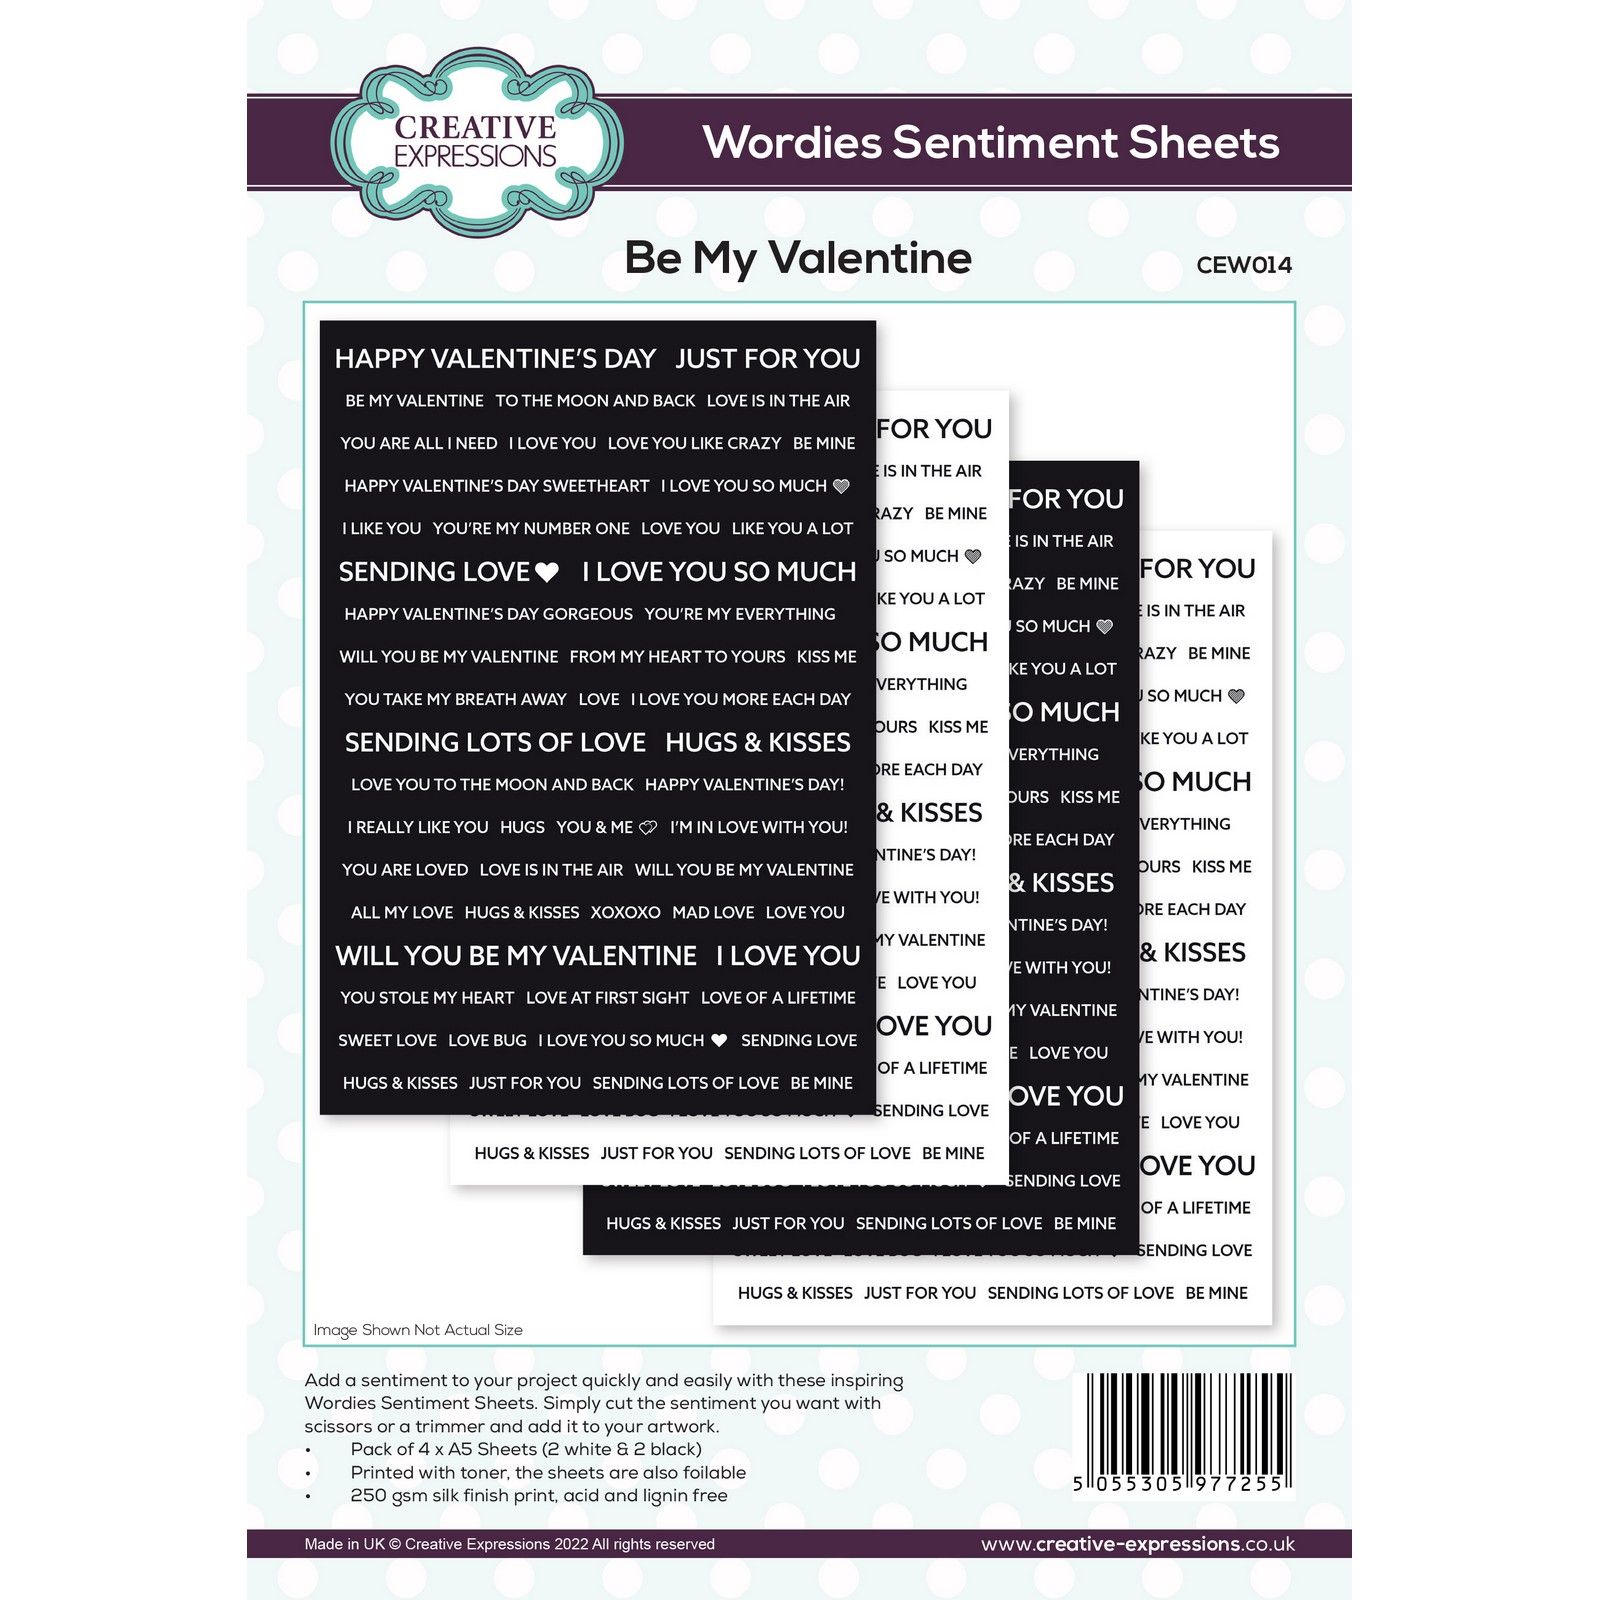 Creative Expressions • Wordies Sentiment Sheets Be My Valentine 4pcs